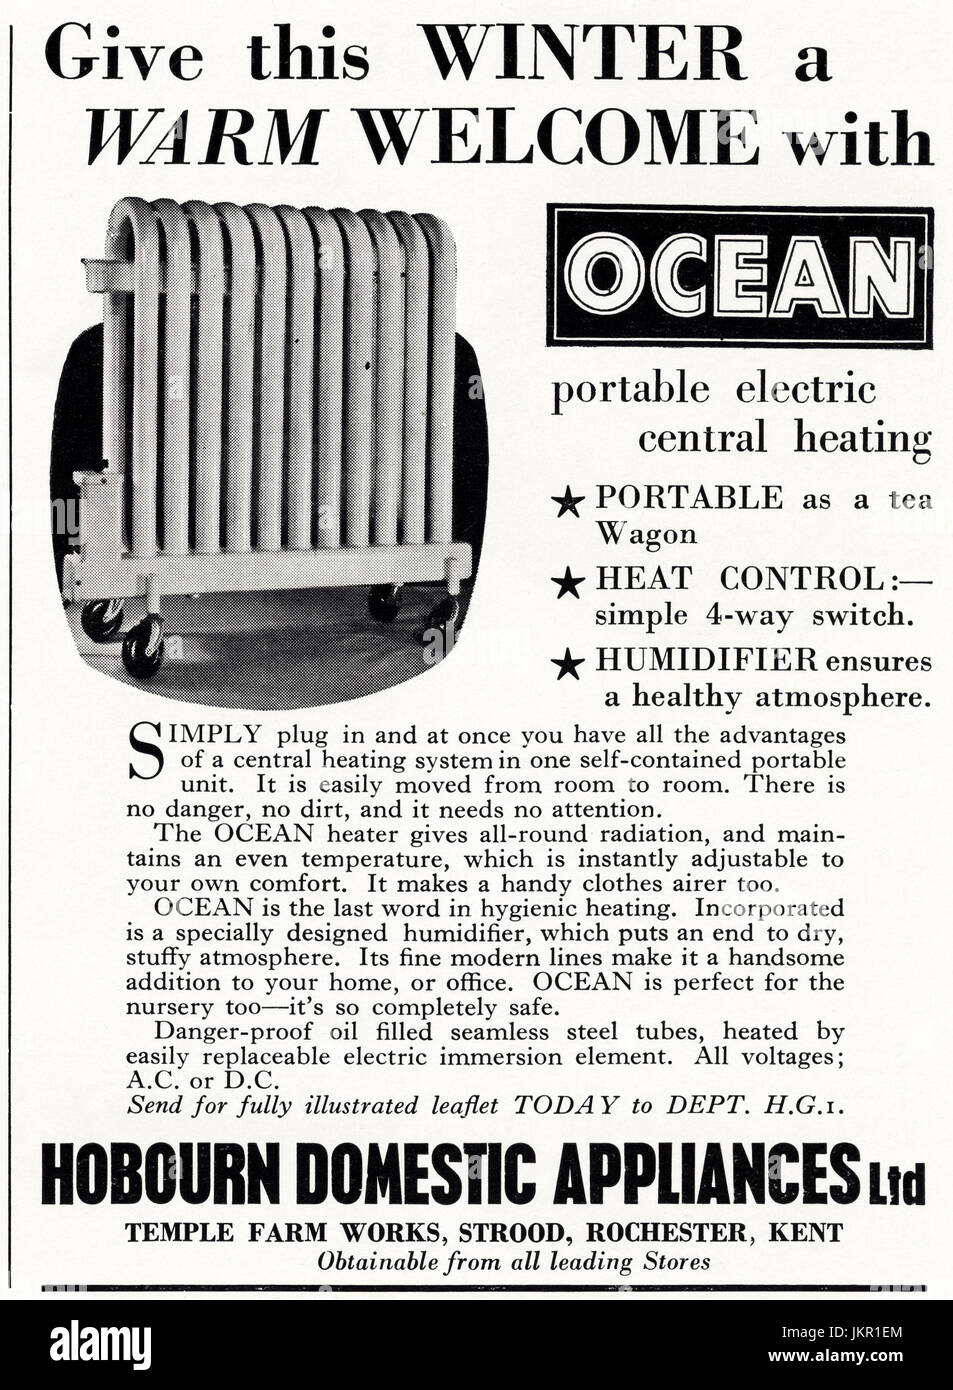 1950s old vintage original advertisement advertising Ocean portable electric central heating by Hobourn Domestic Appliances of Rochester Kent England UK in magazine circa 1950 Stock Photo